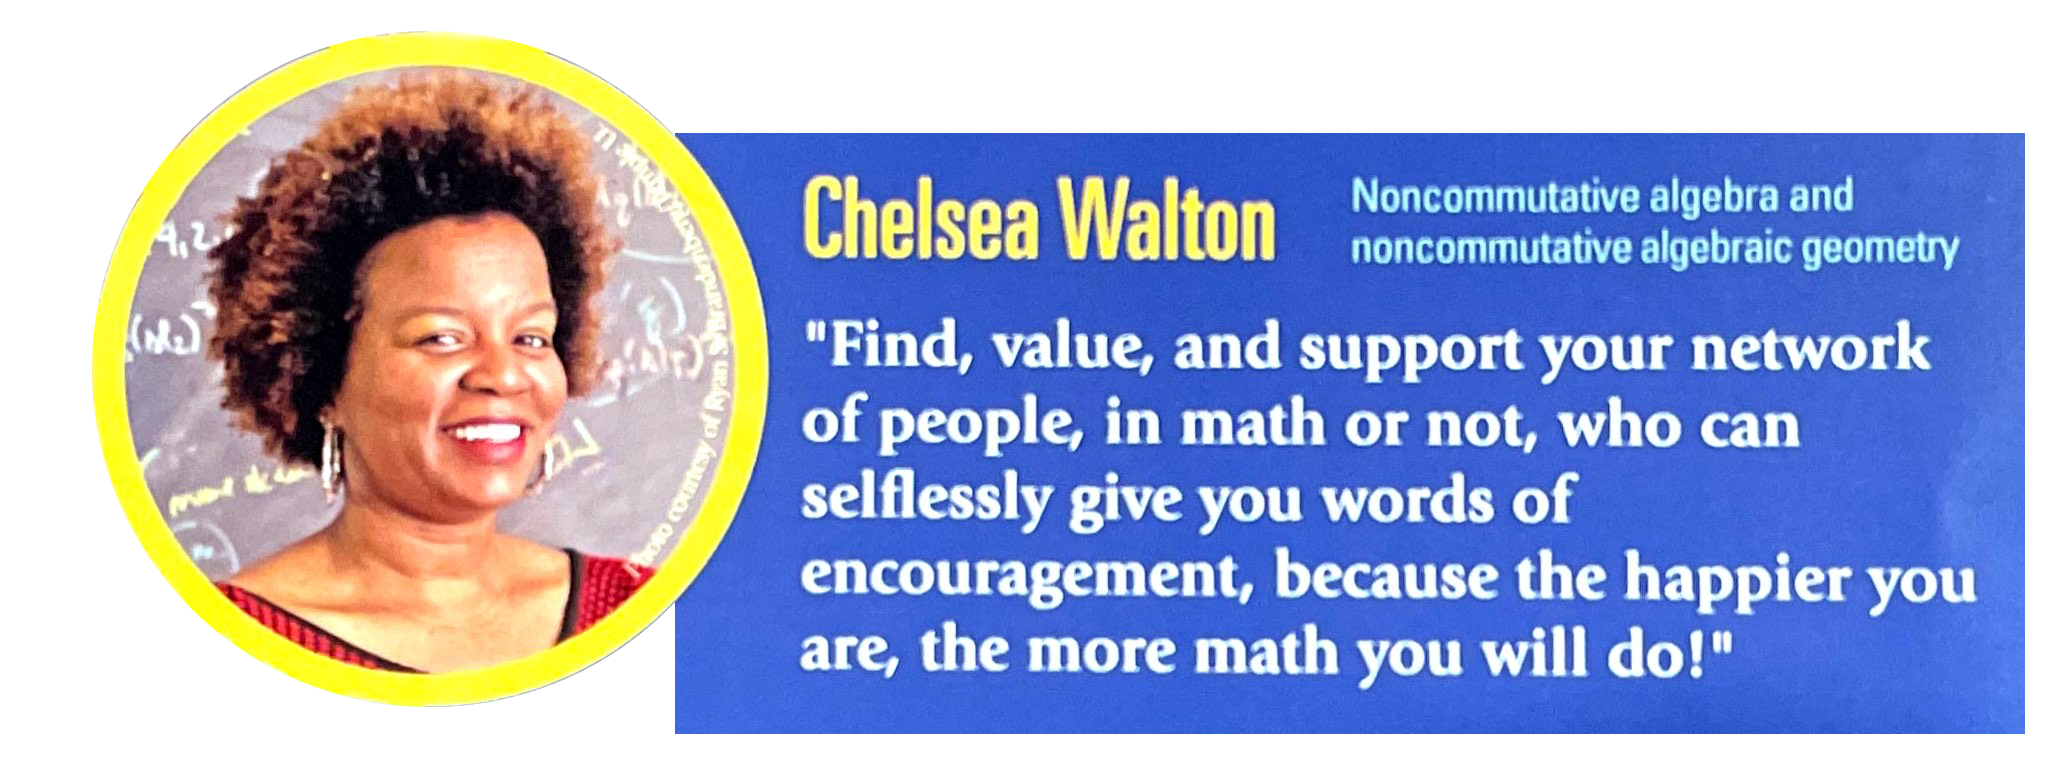 Spotlight: Chelsea Walton, Noncommutative algebra and noncommutative algebraic geometry. "Find, value, and support your network of people, in math or not, who can selflessly give you words of encouragement, because the happier you are, the more math you will do!"